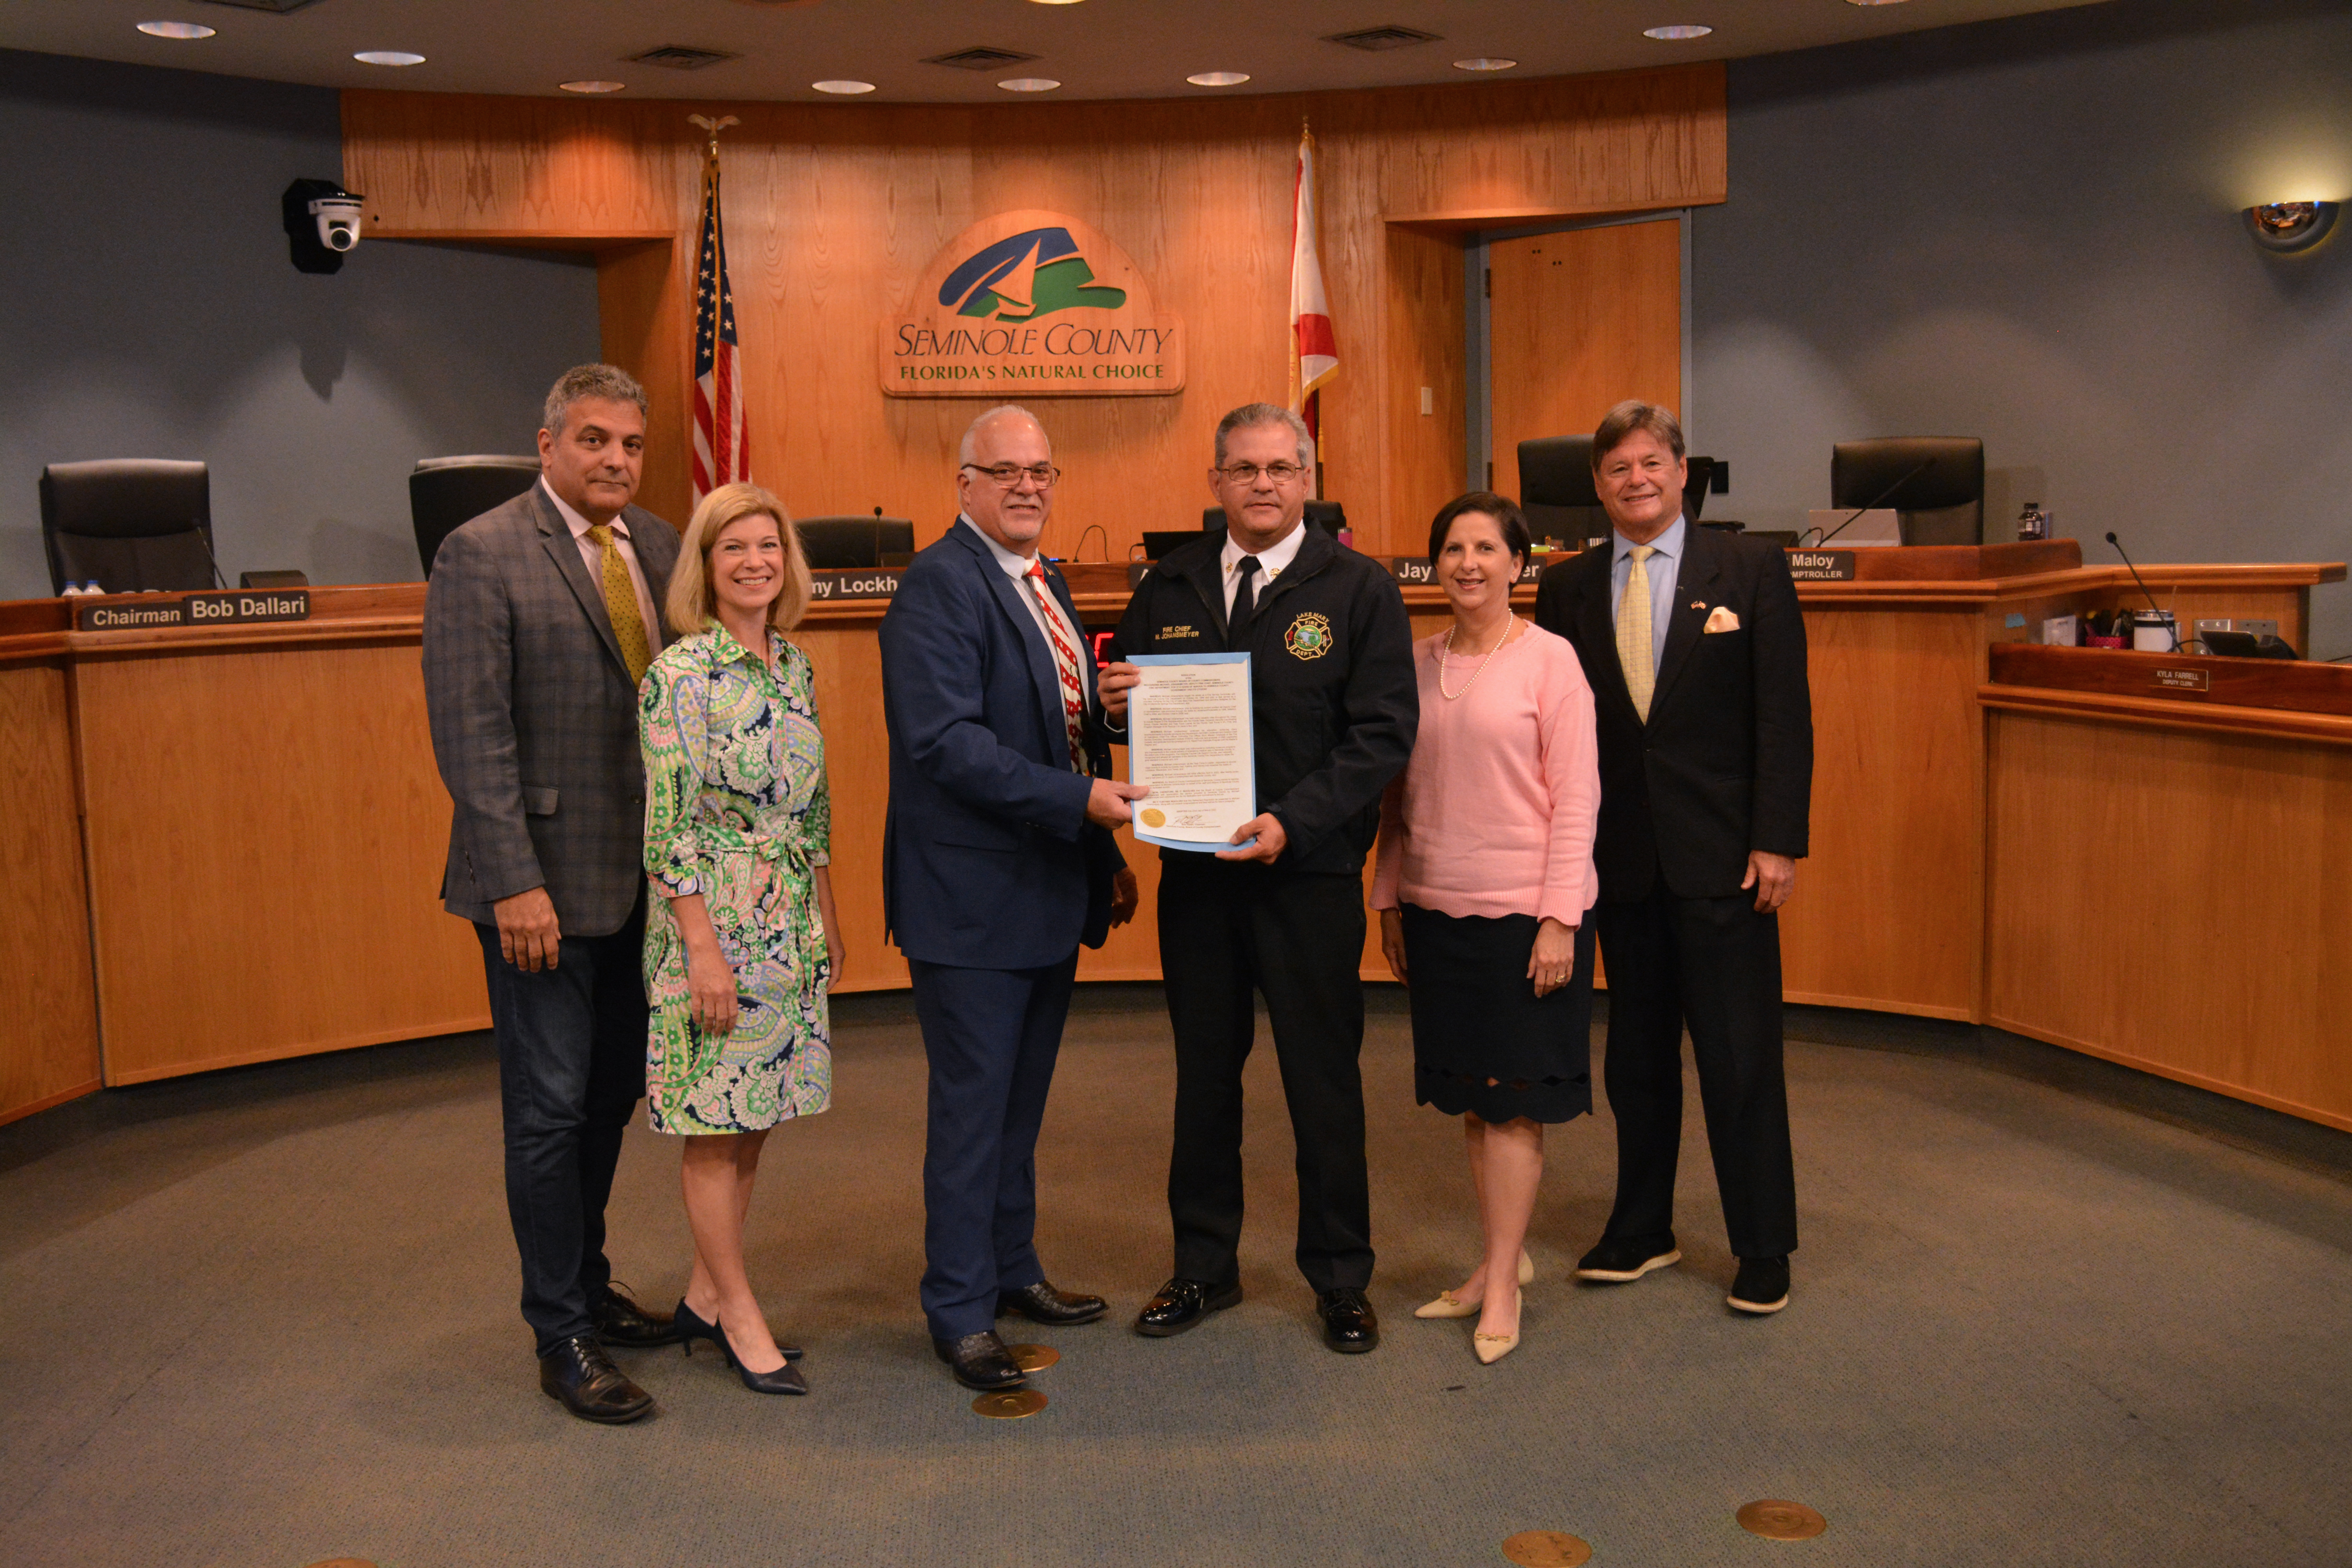 Resolution — Recognizing Michael Johansmeyer upon his retirement for 27.5 years of service to Seminole County Government and its citizens.  (Michael Johansmeyer, Deputy Chief of Administration, Seminole County Fire Department)